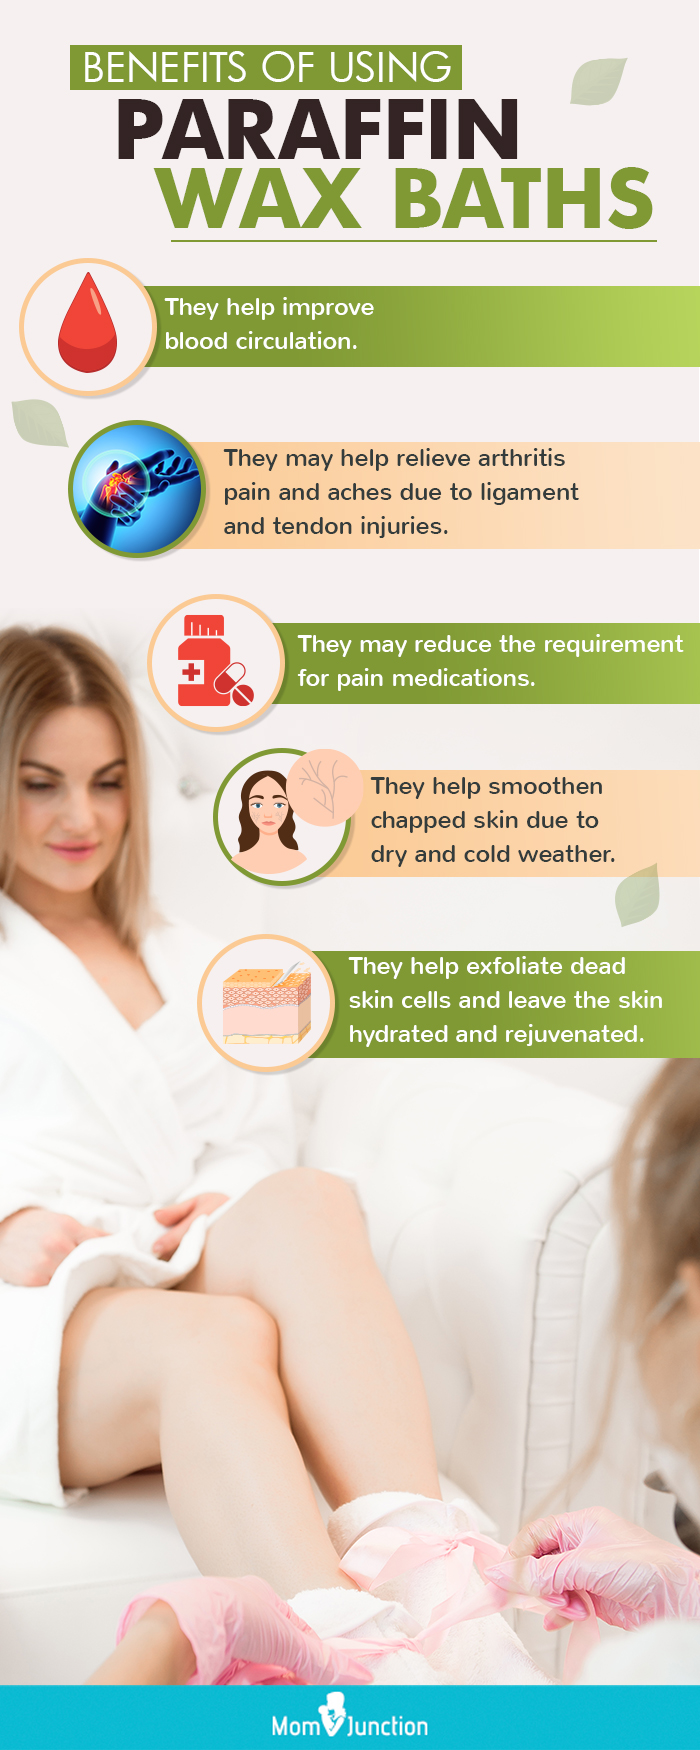 Infographic: How Paraffin Wax Baths May Benefit You